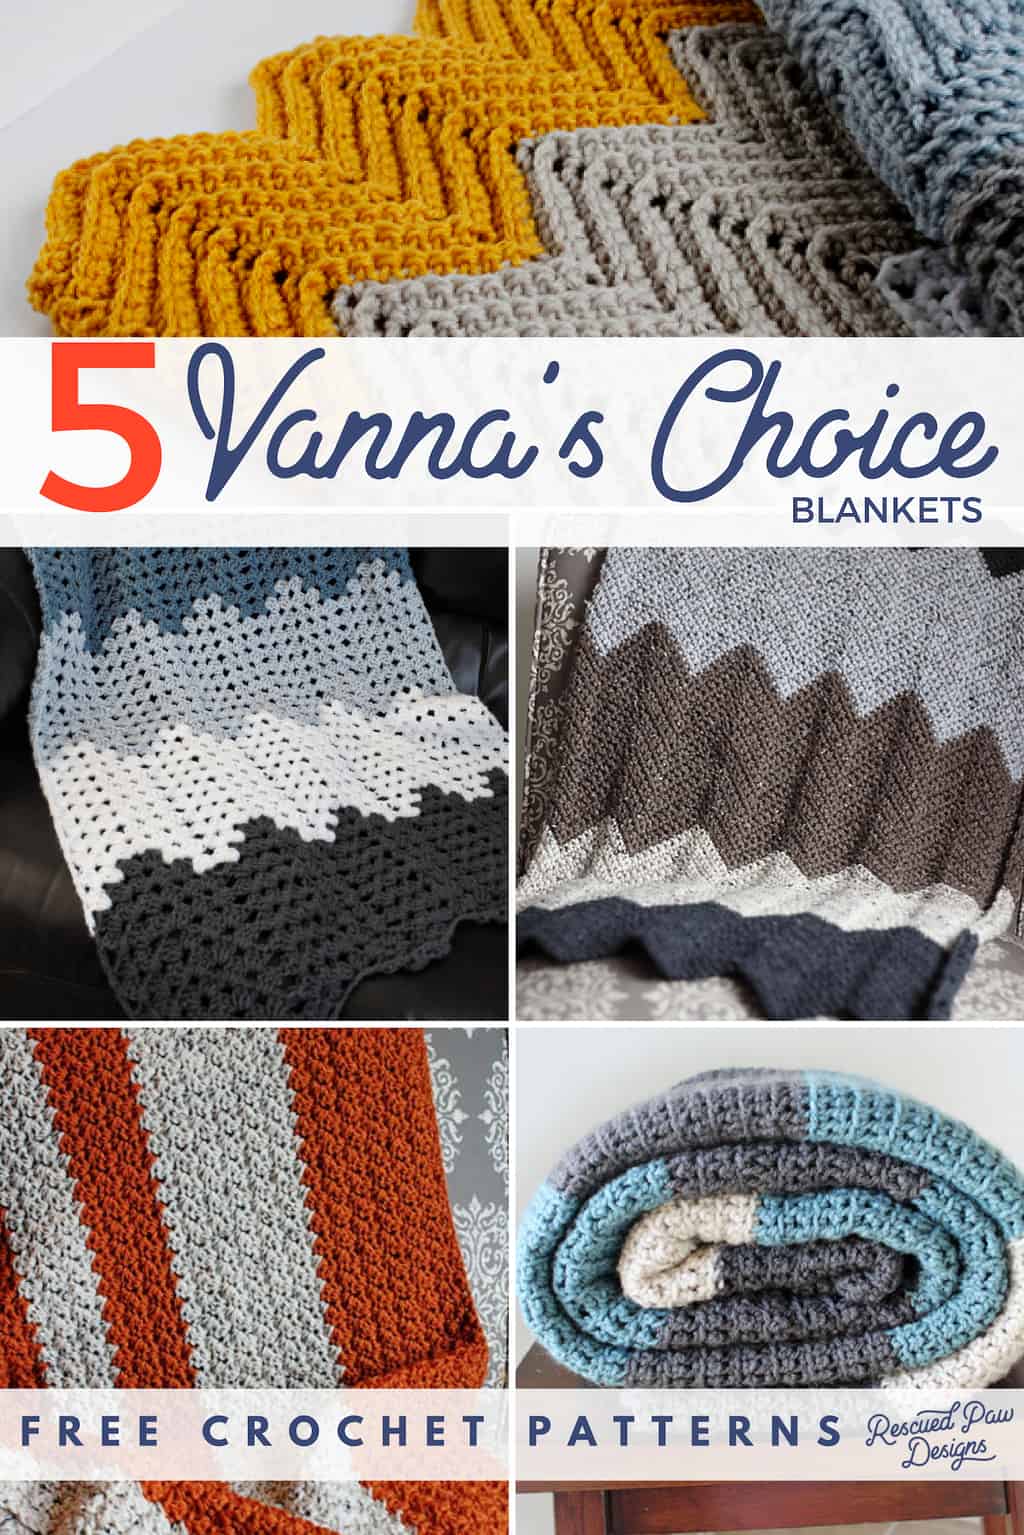 CROCHET PATTERNS - 5 Vanna's Choice Yarn Blanket Patterns that are EASY to make! + SIMPLE CROCHETED BLANKETS by Easy Crochet - easycrochet.com via @easycrochetcom